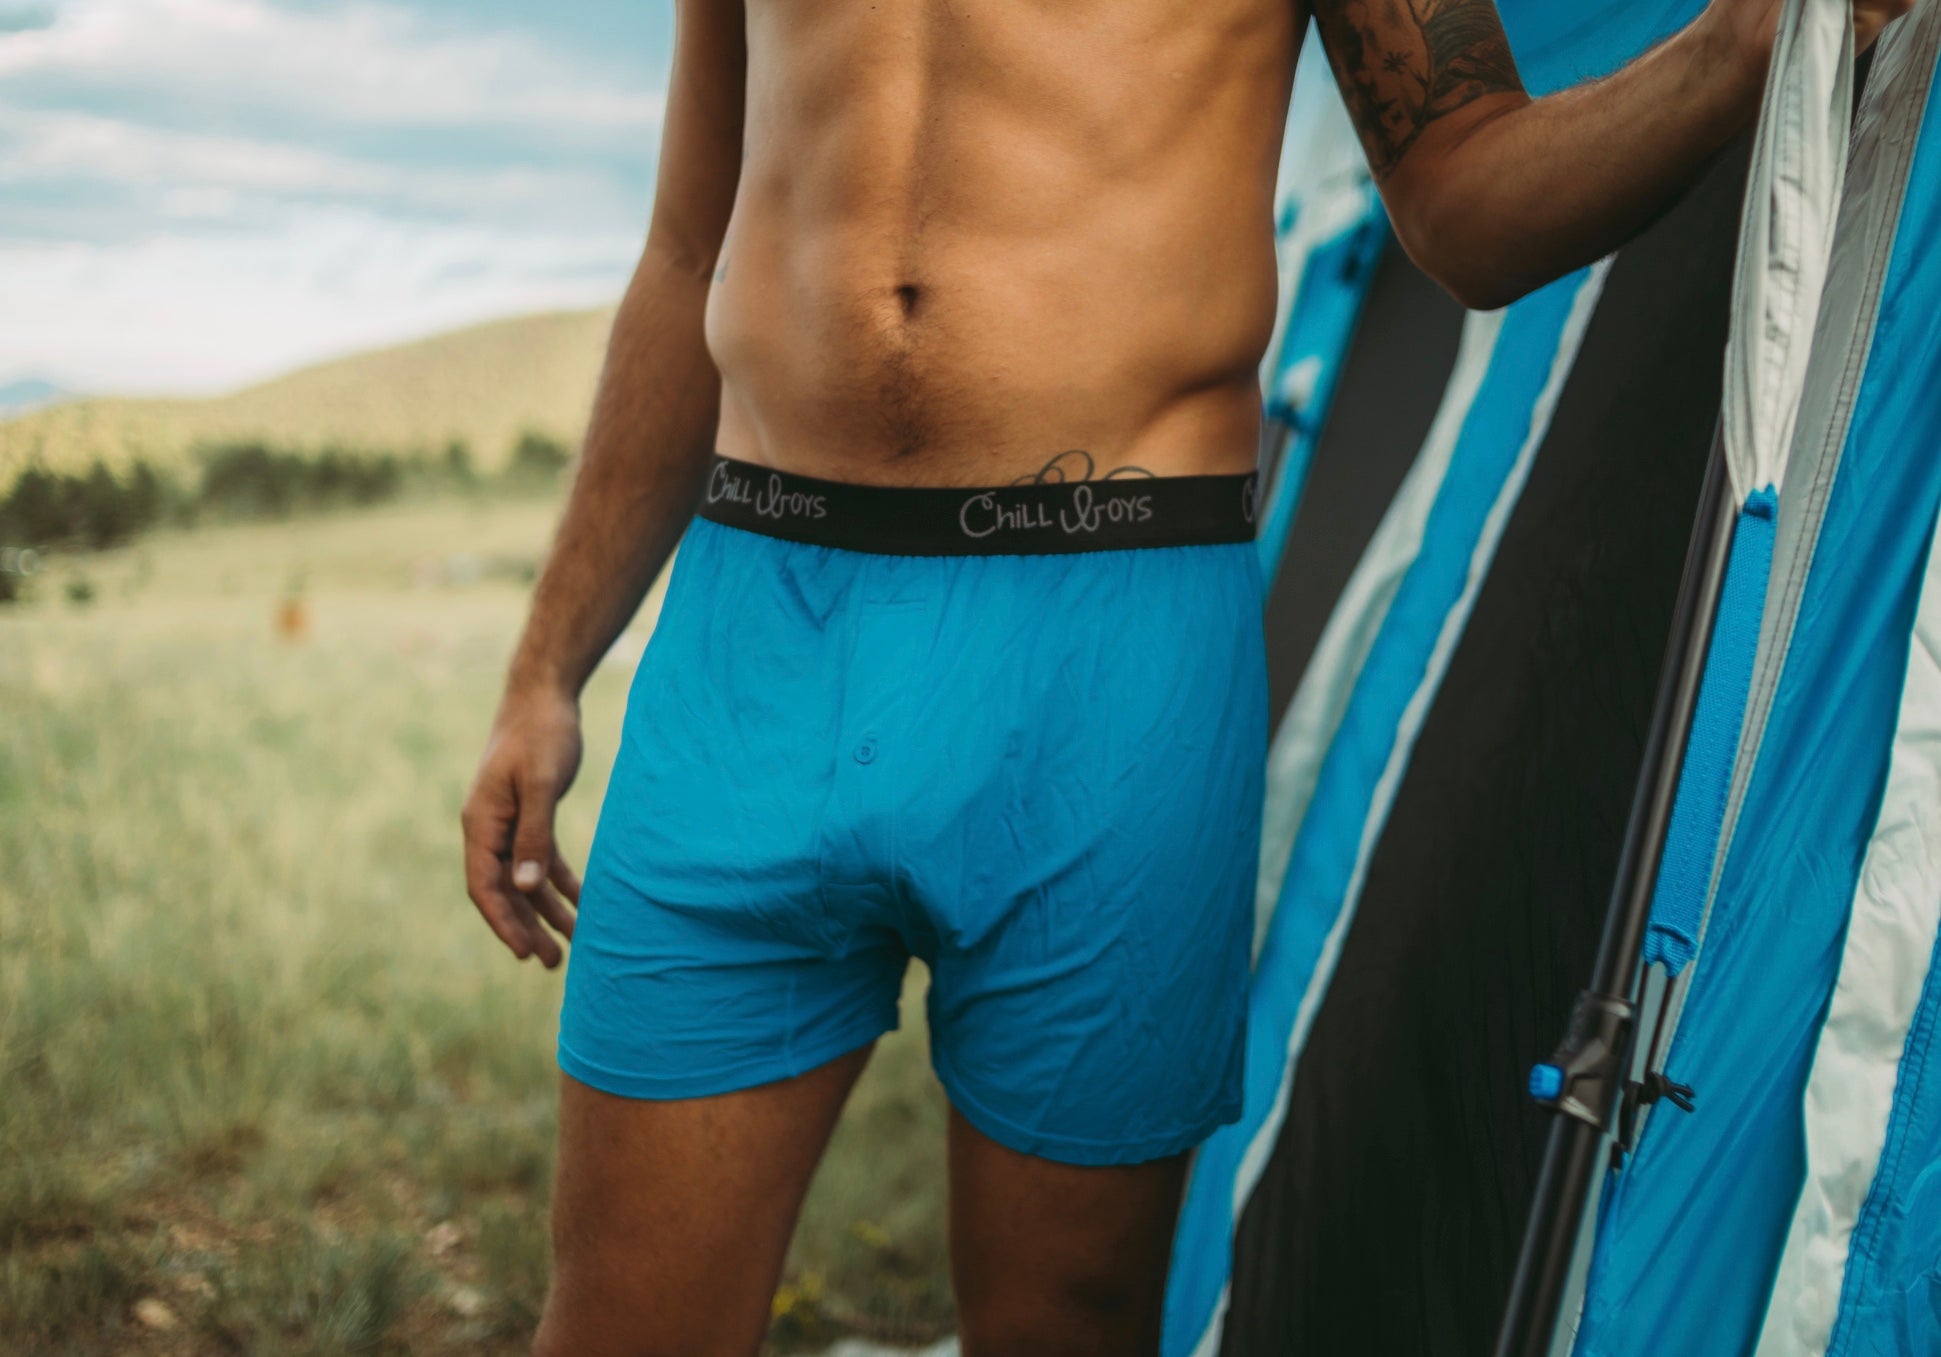 Bamboo Underwear: Everything You Need to Know